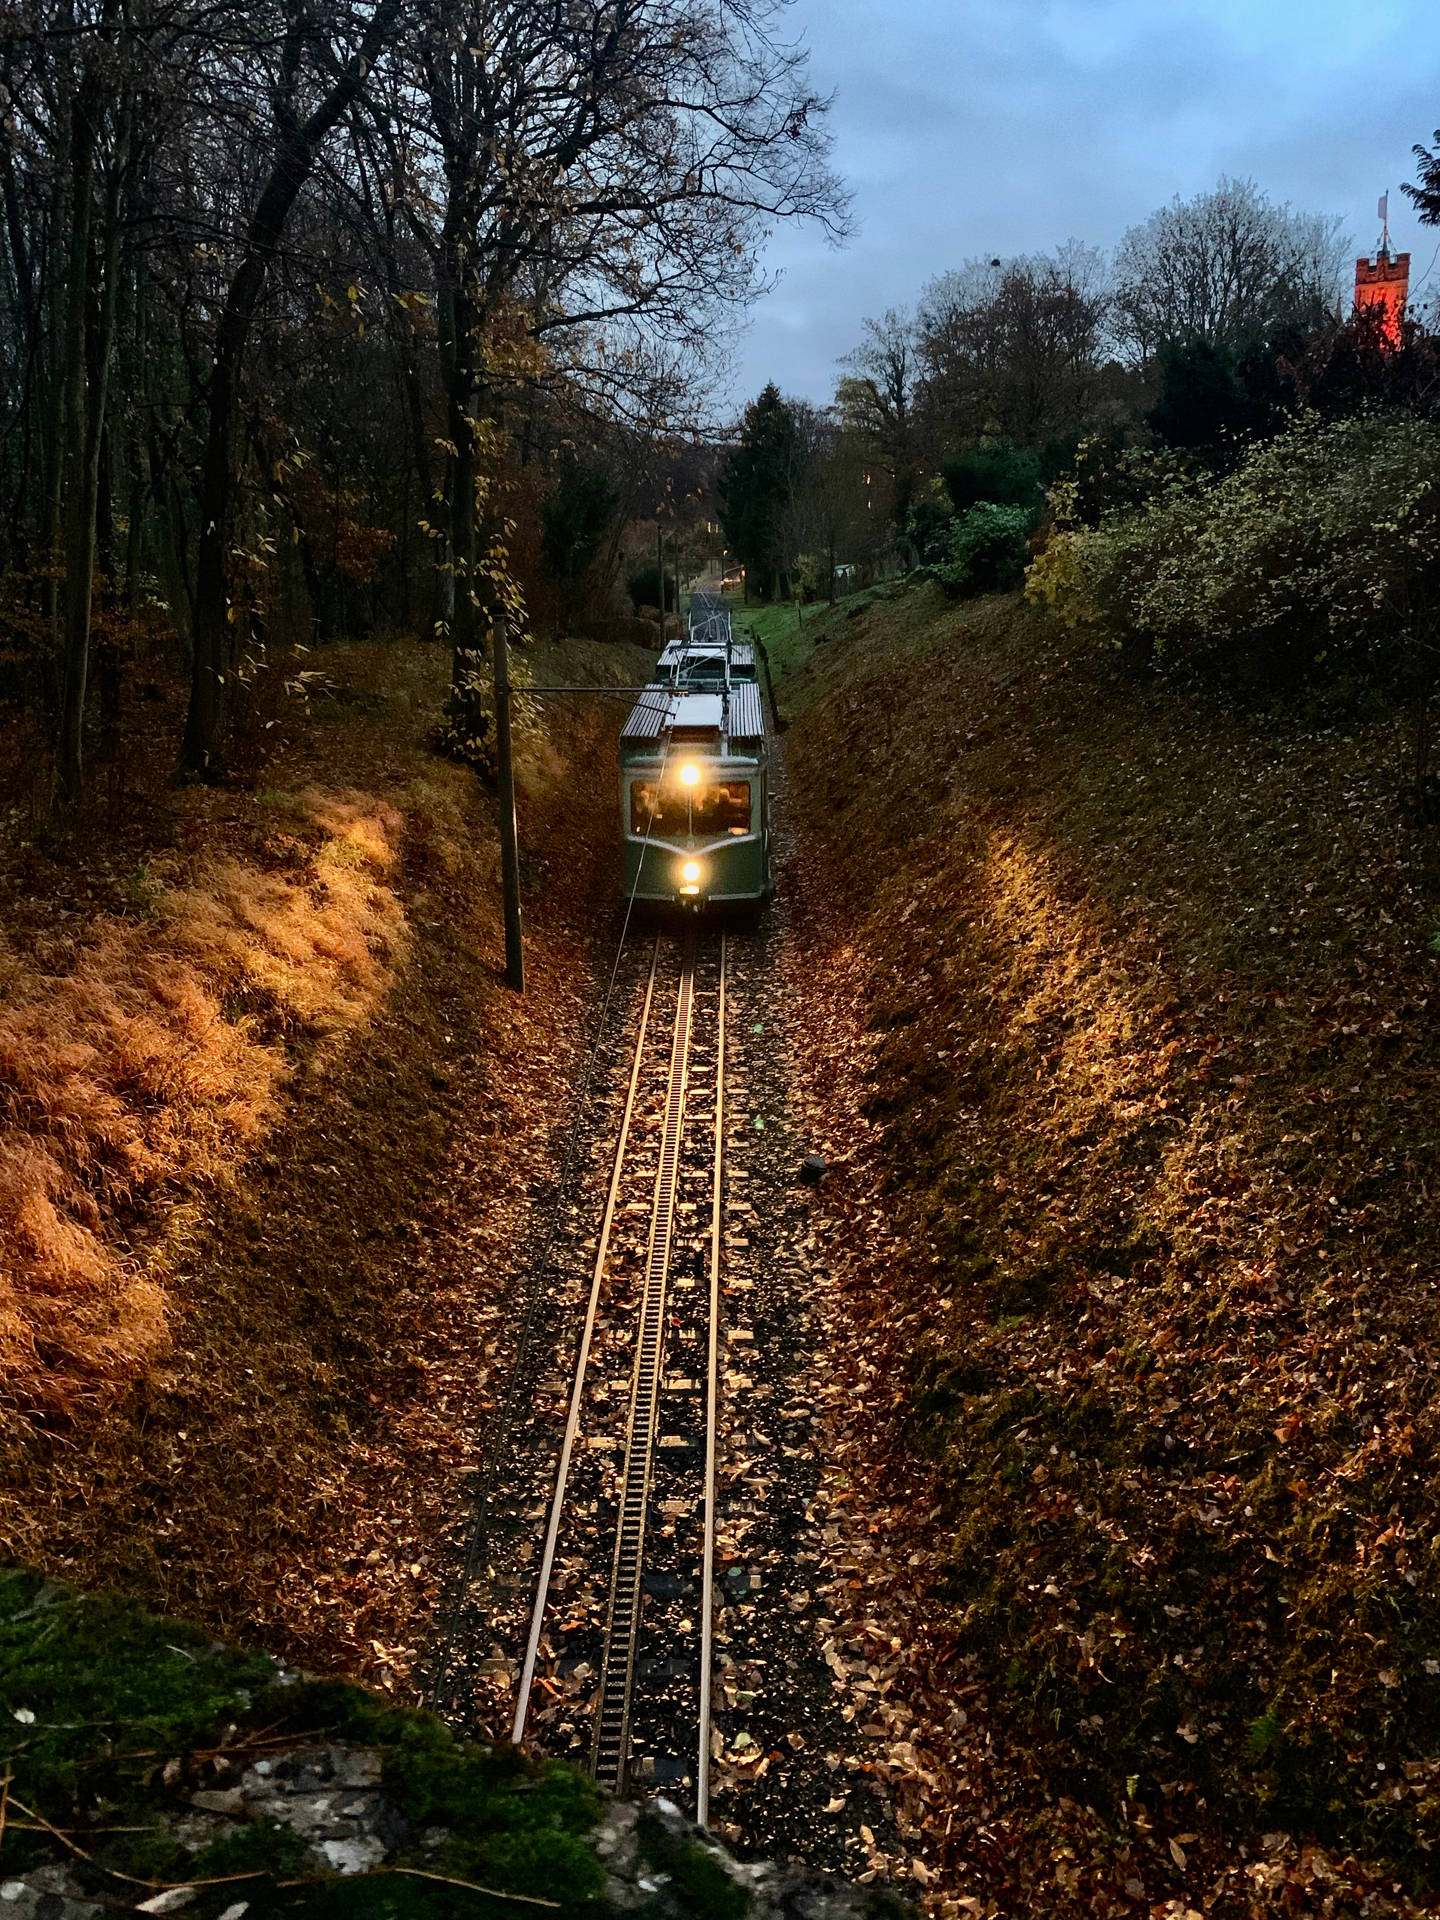 A Train Travelling Through The Countryside